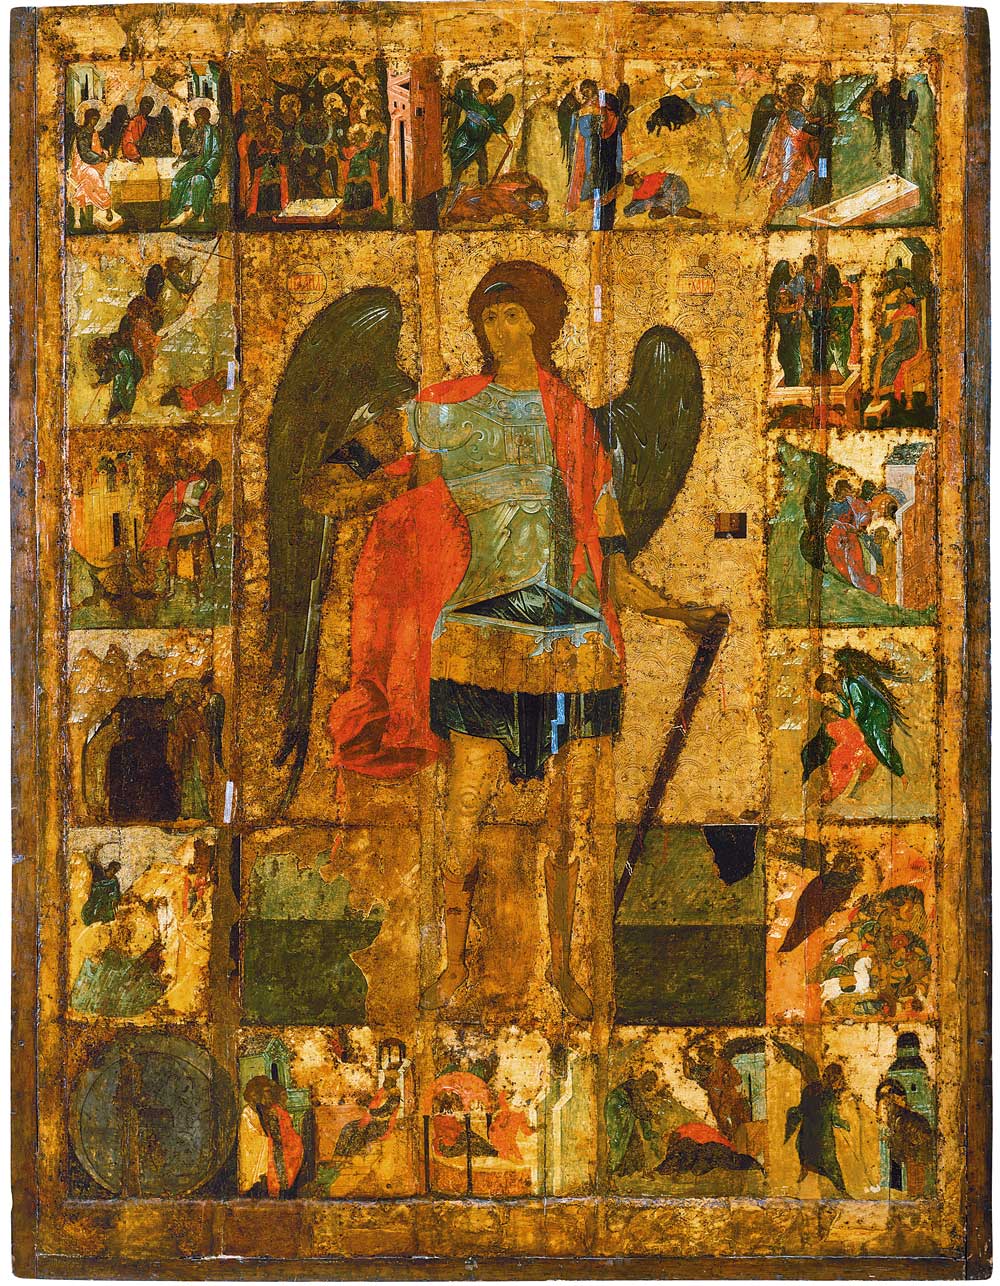 Archangel Michael with Scenes from His Deeds. The temple icon of Archangel Cathedral of the Moscow Kremlin. 1410sDormition. The temple icon of Assumption Cathedral of the Moscow Kremlin. c. 1479